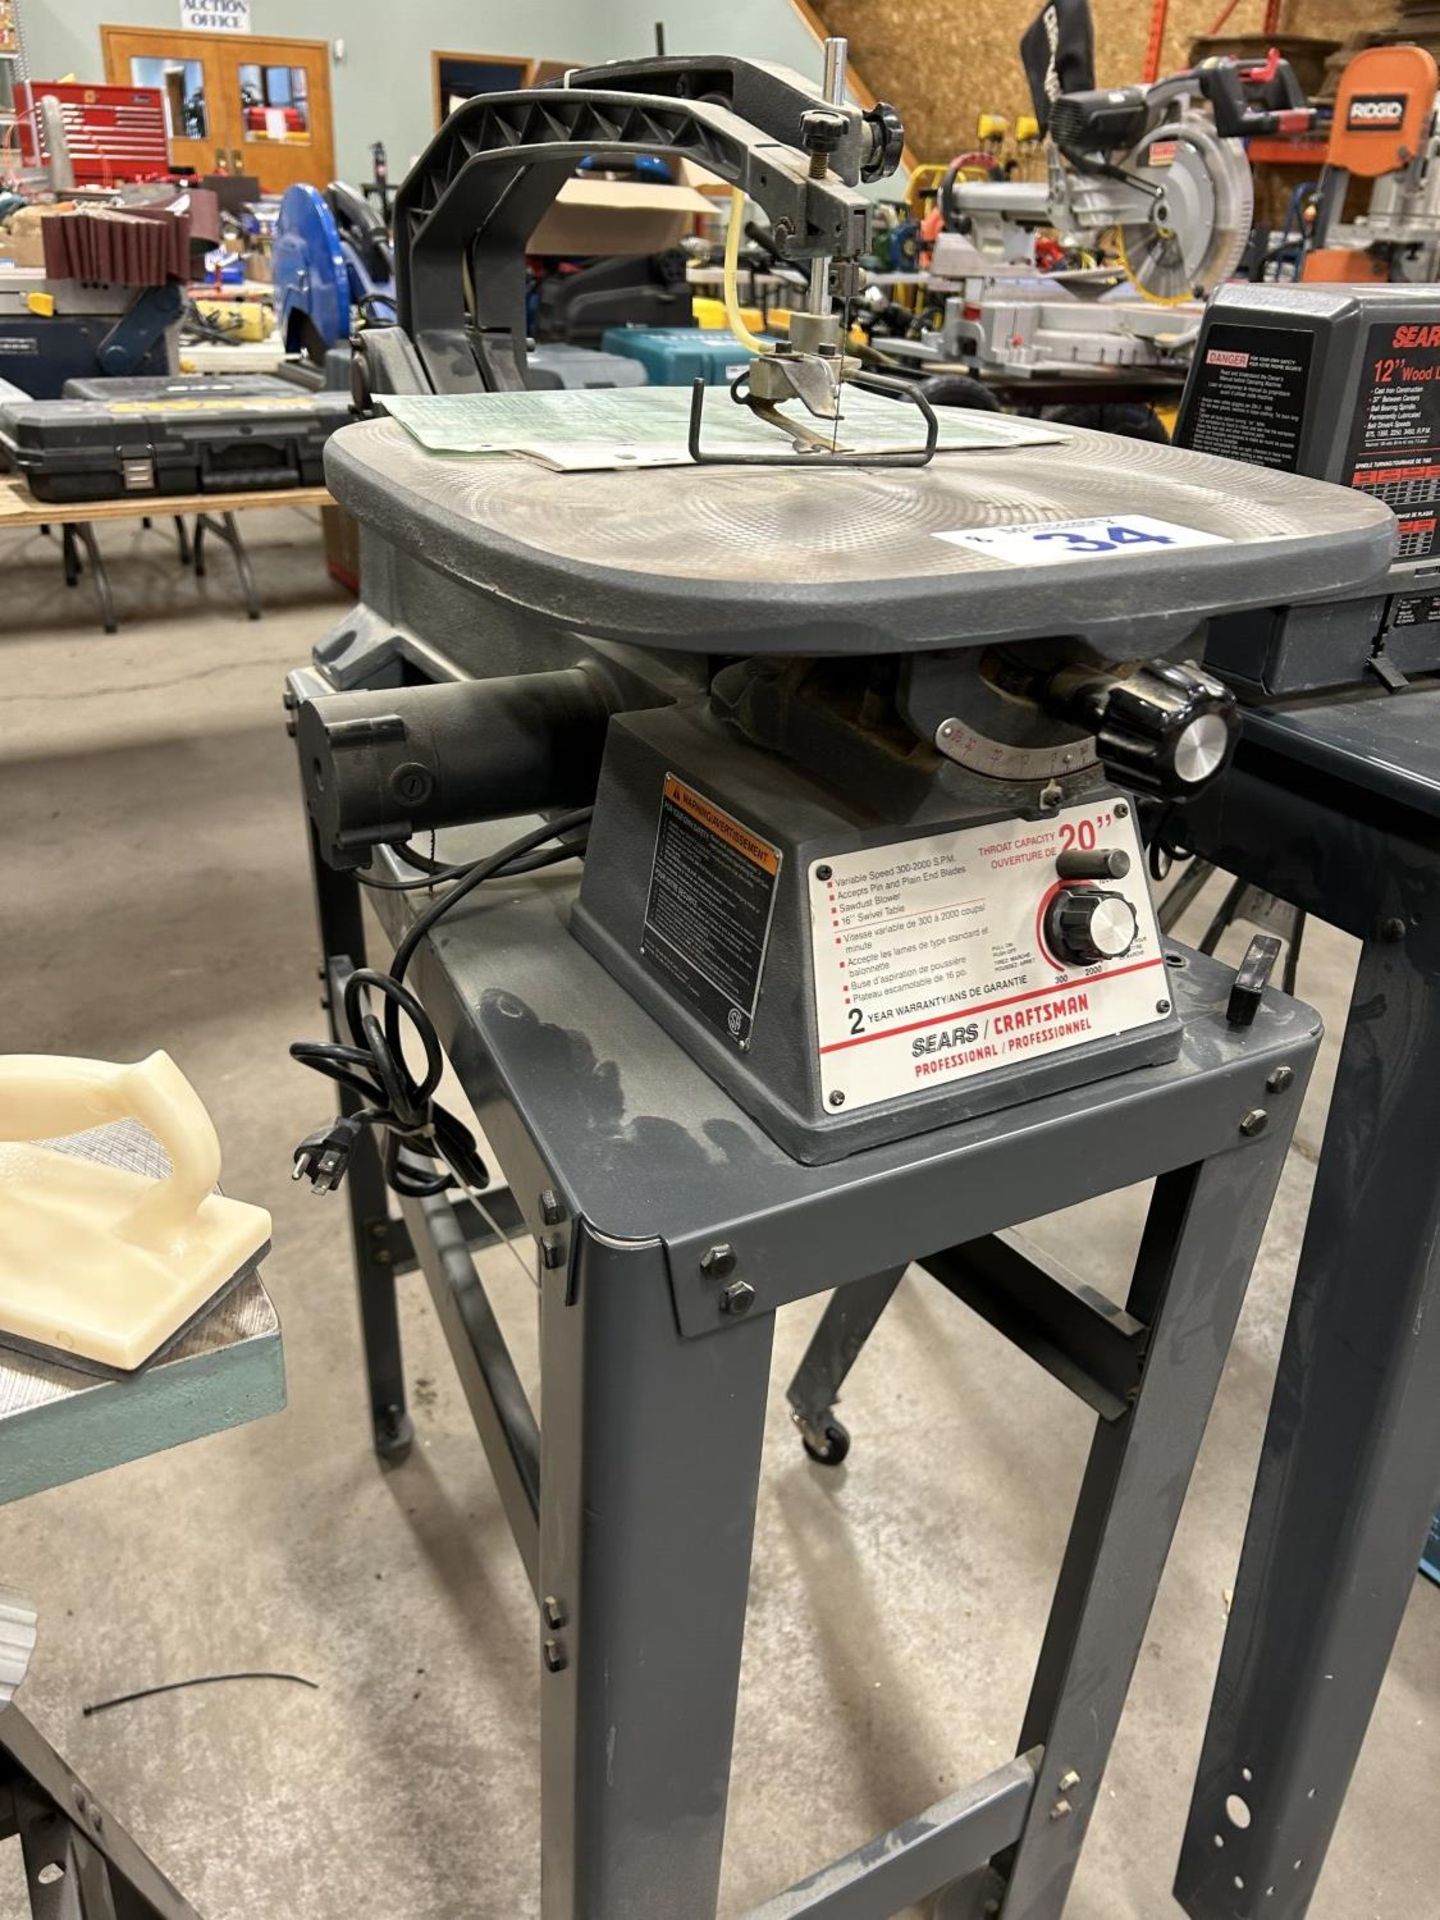 SEARS CRAFTSMAN 16" VARIABLE SPEED SCROLL SAW